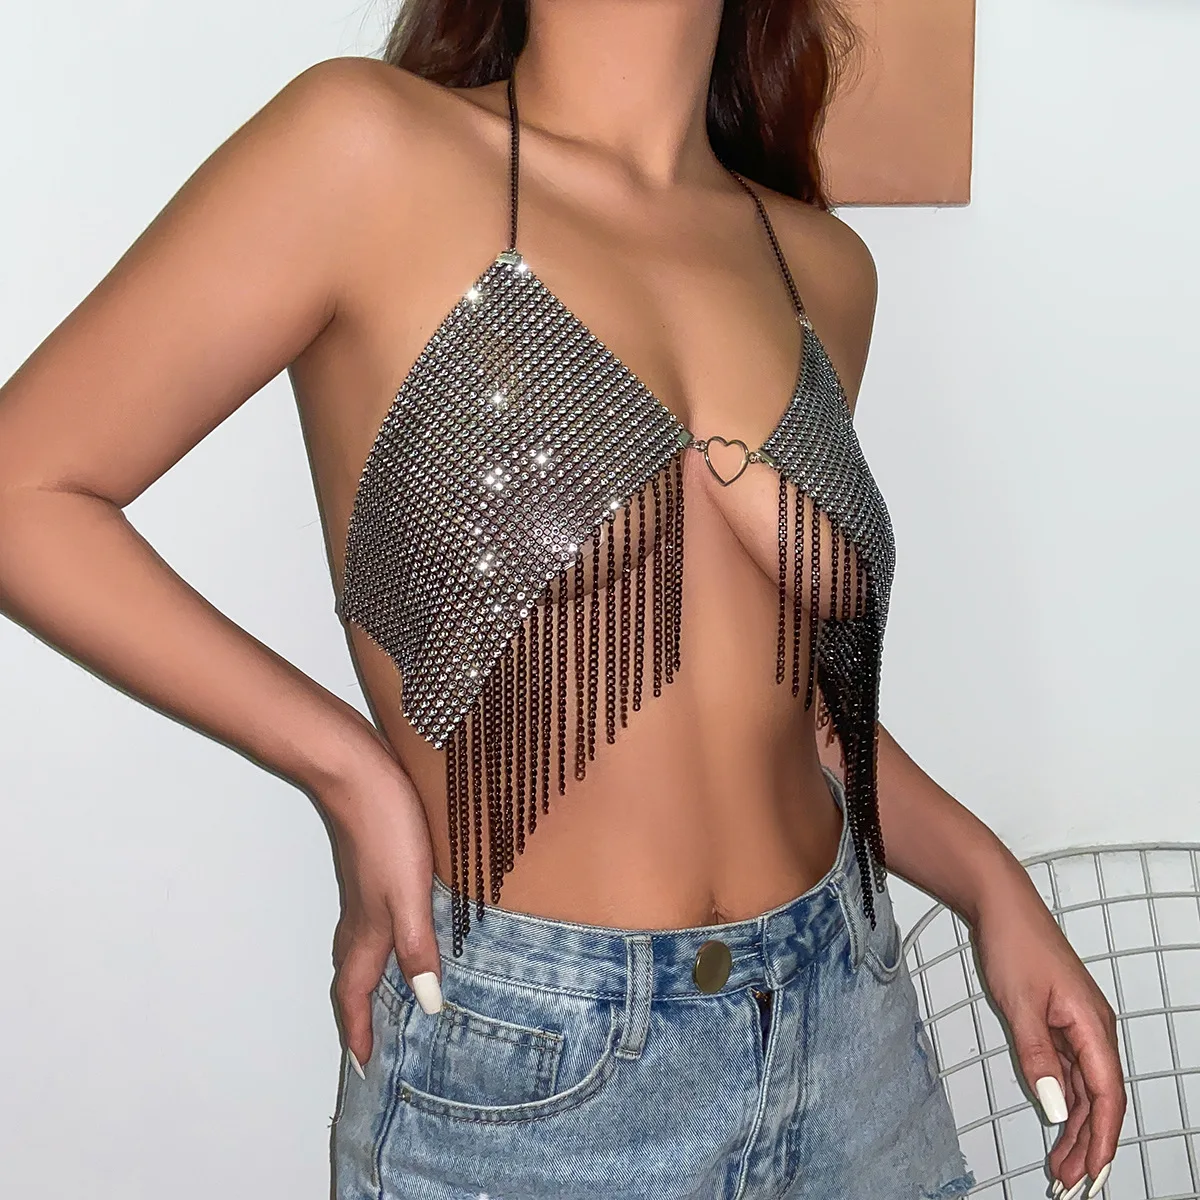 Nebula Crystal Top Metal Mesh Chainmail Rave Outfit Festival Clothing Party  Crop Top Going Out Nightclub Sequins Rhinestone Diamond Y2K 